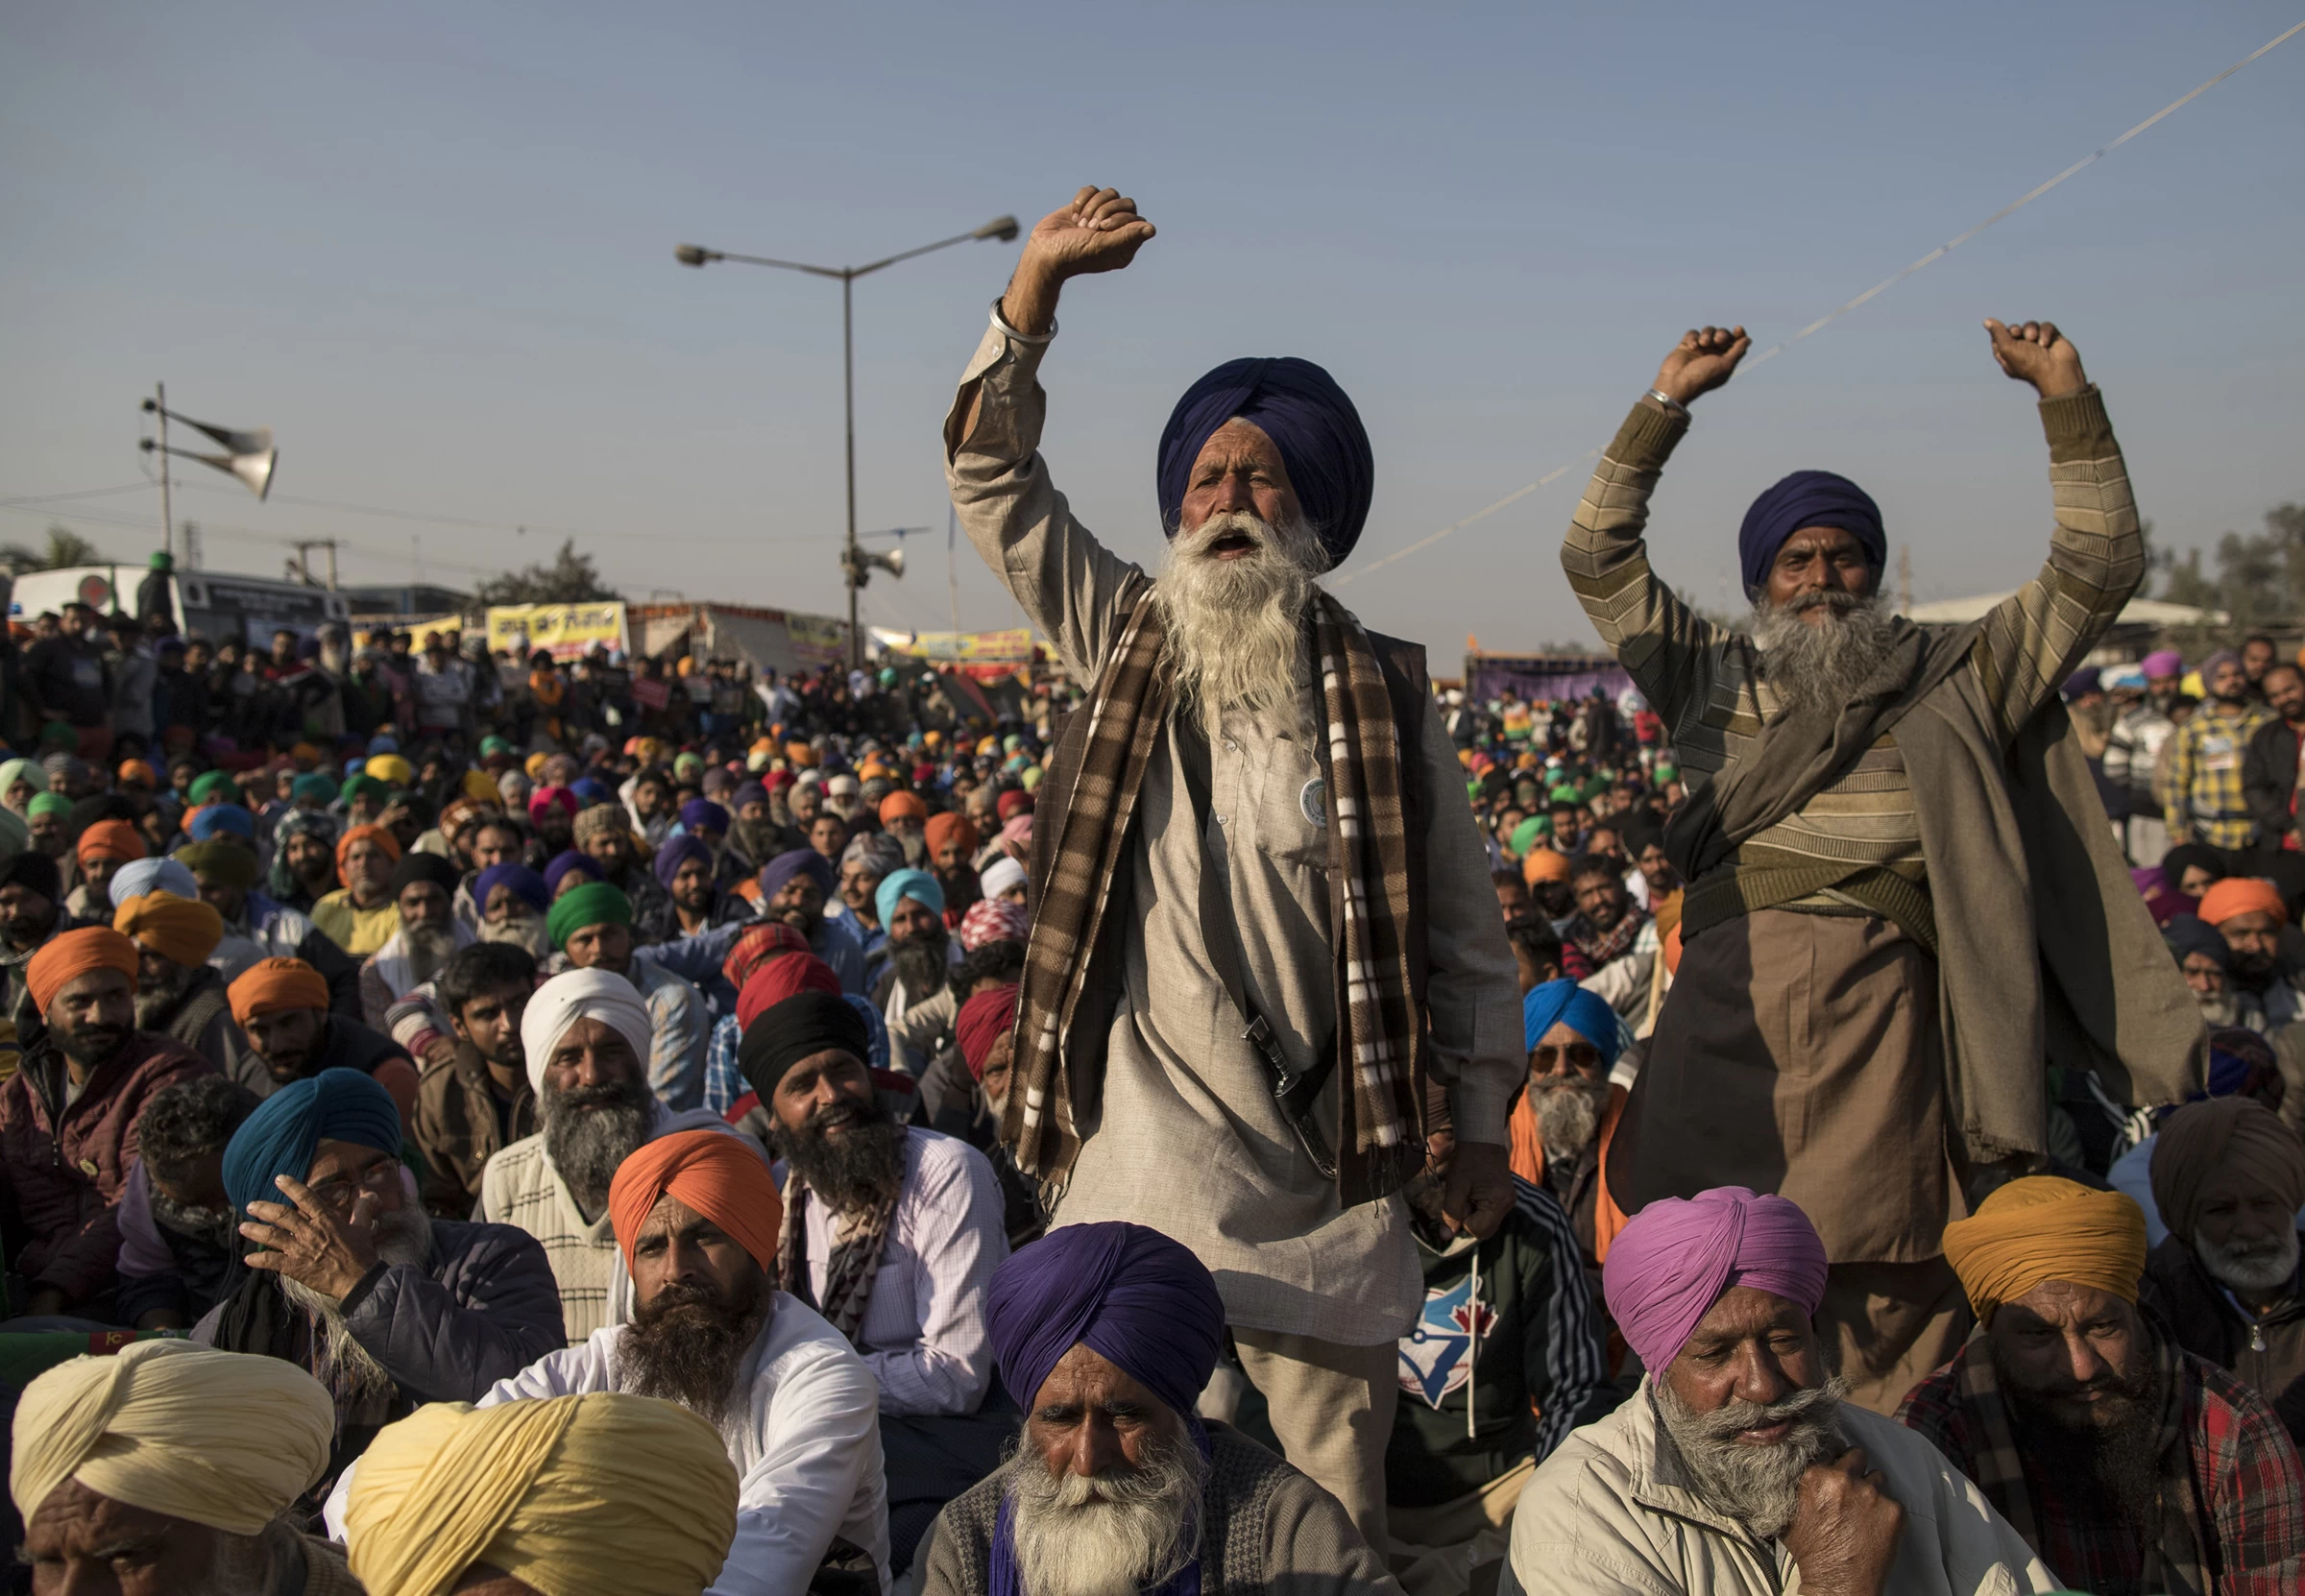 India’s handling of farmers protests draws criticism in US Congress report